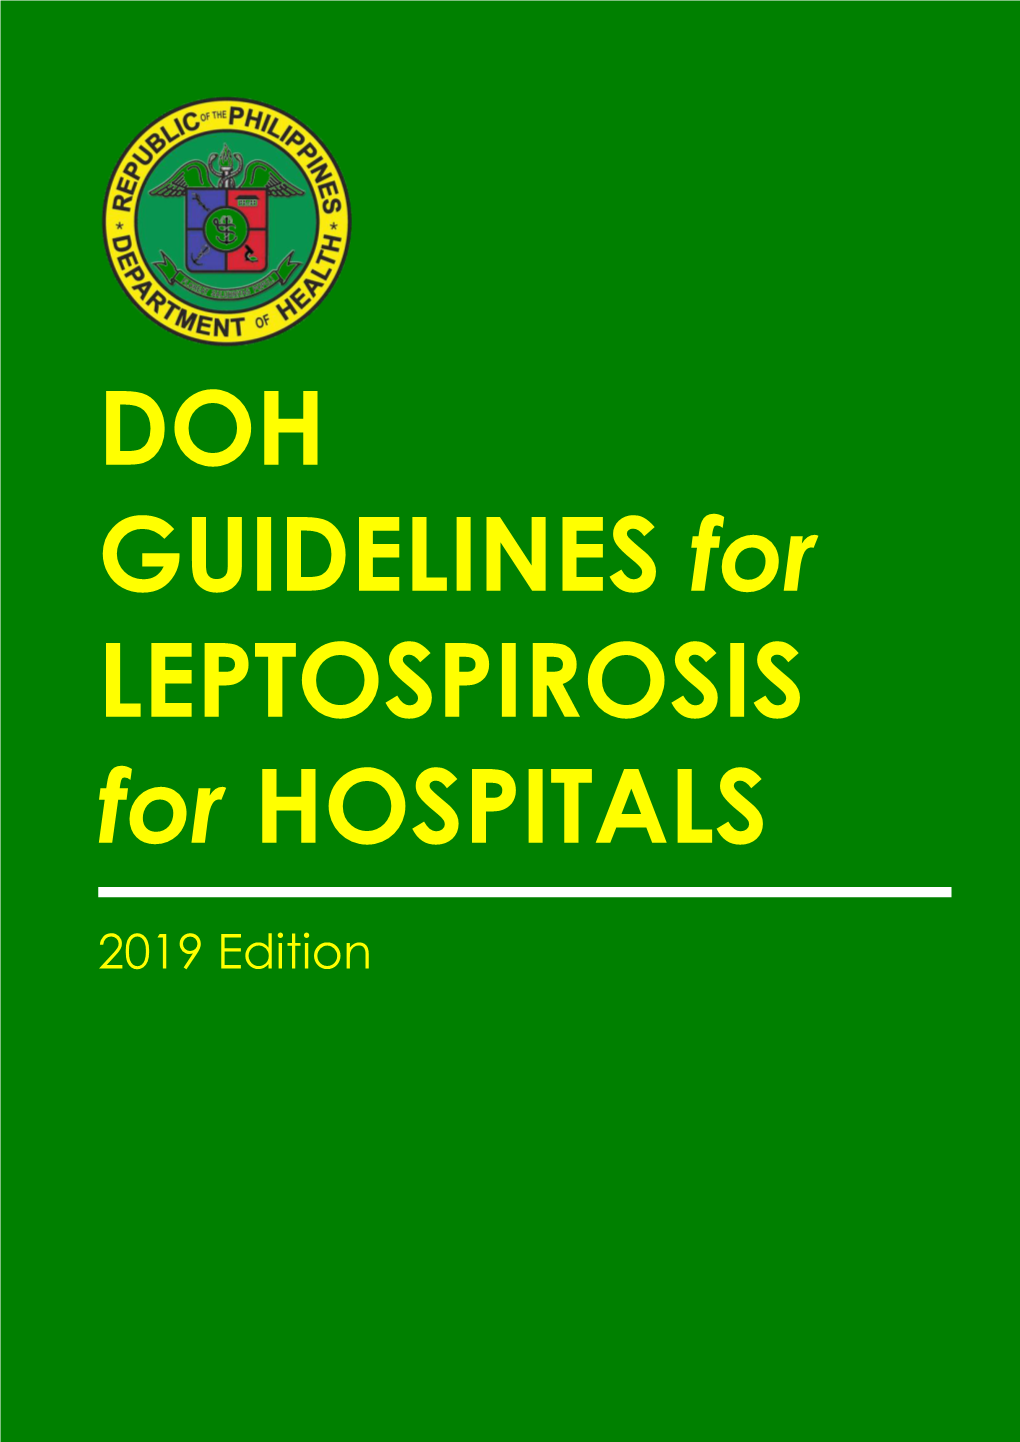 DOH GUIDELINES for LEPTOSPIROSIS for HOSPITALS